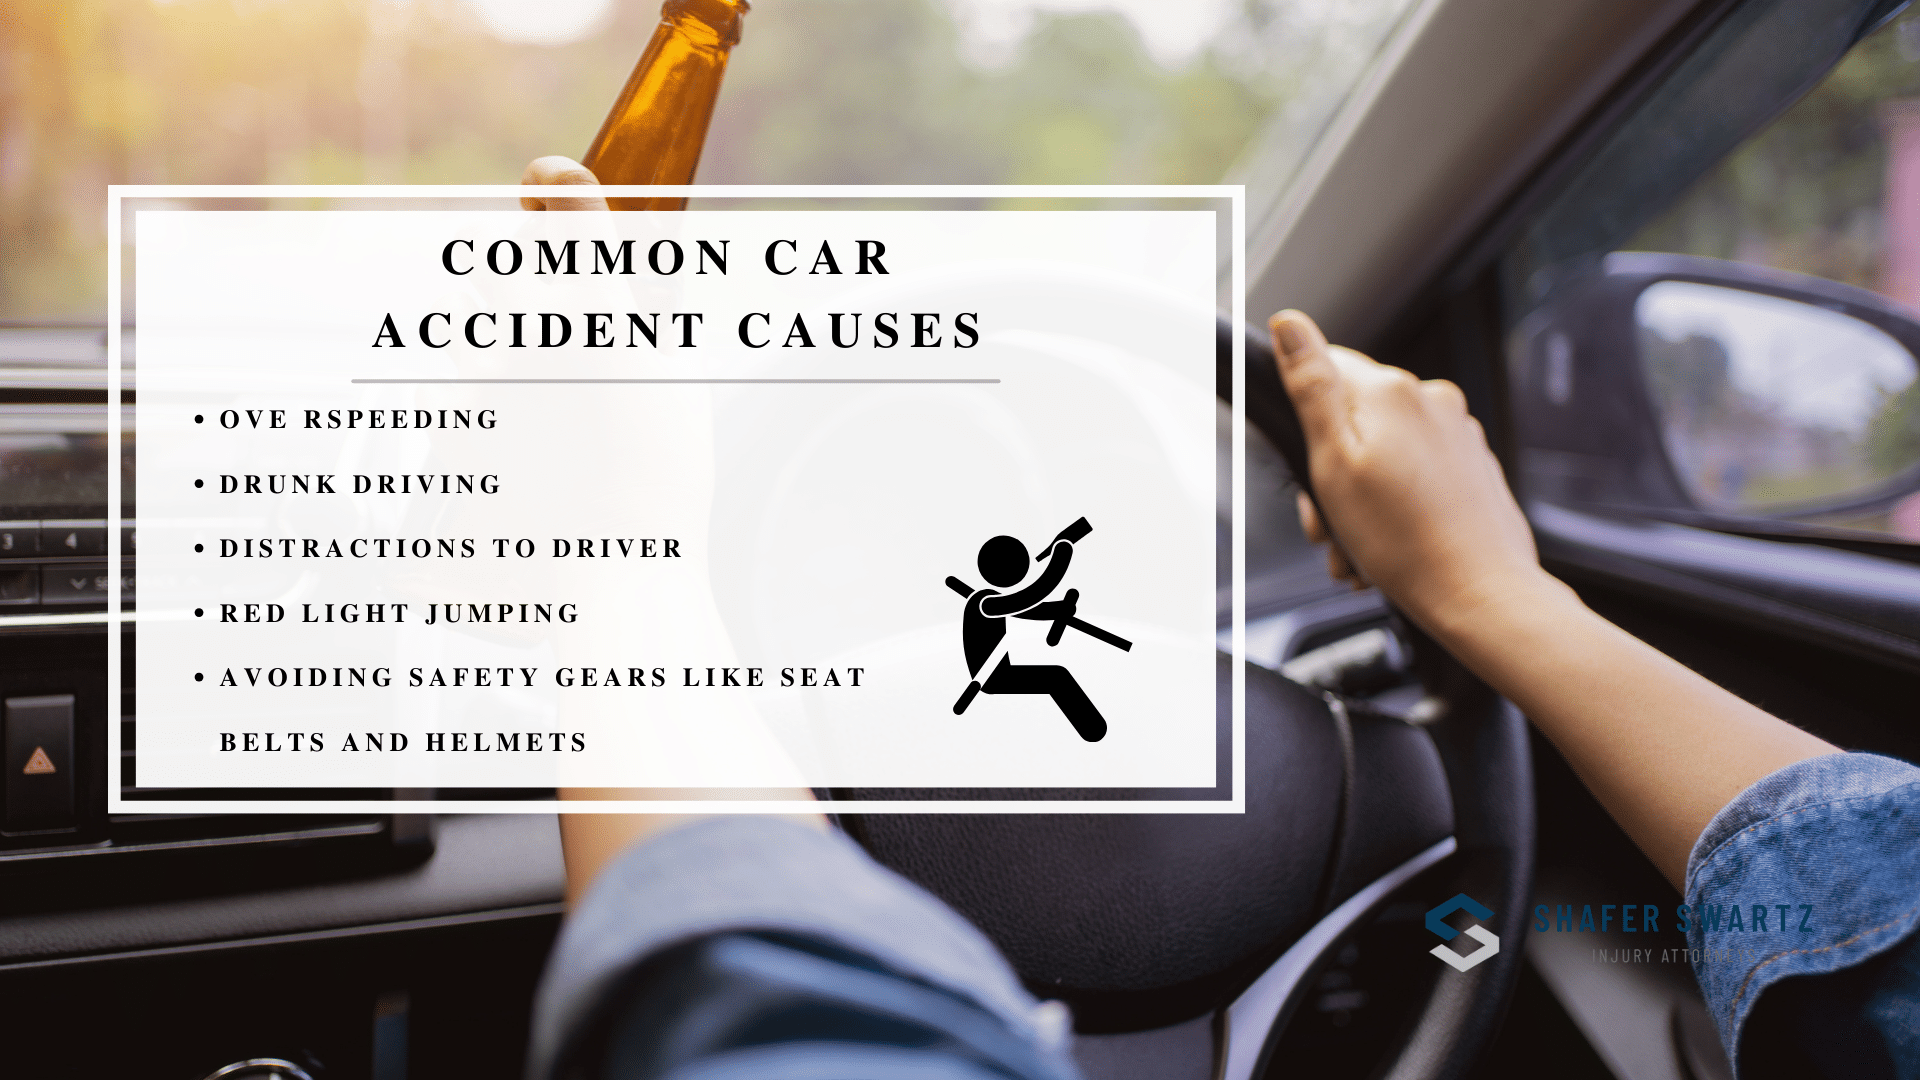 Infographic of the most common car accident causes